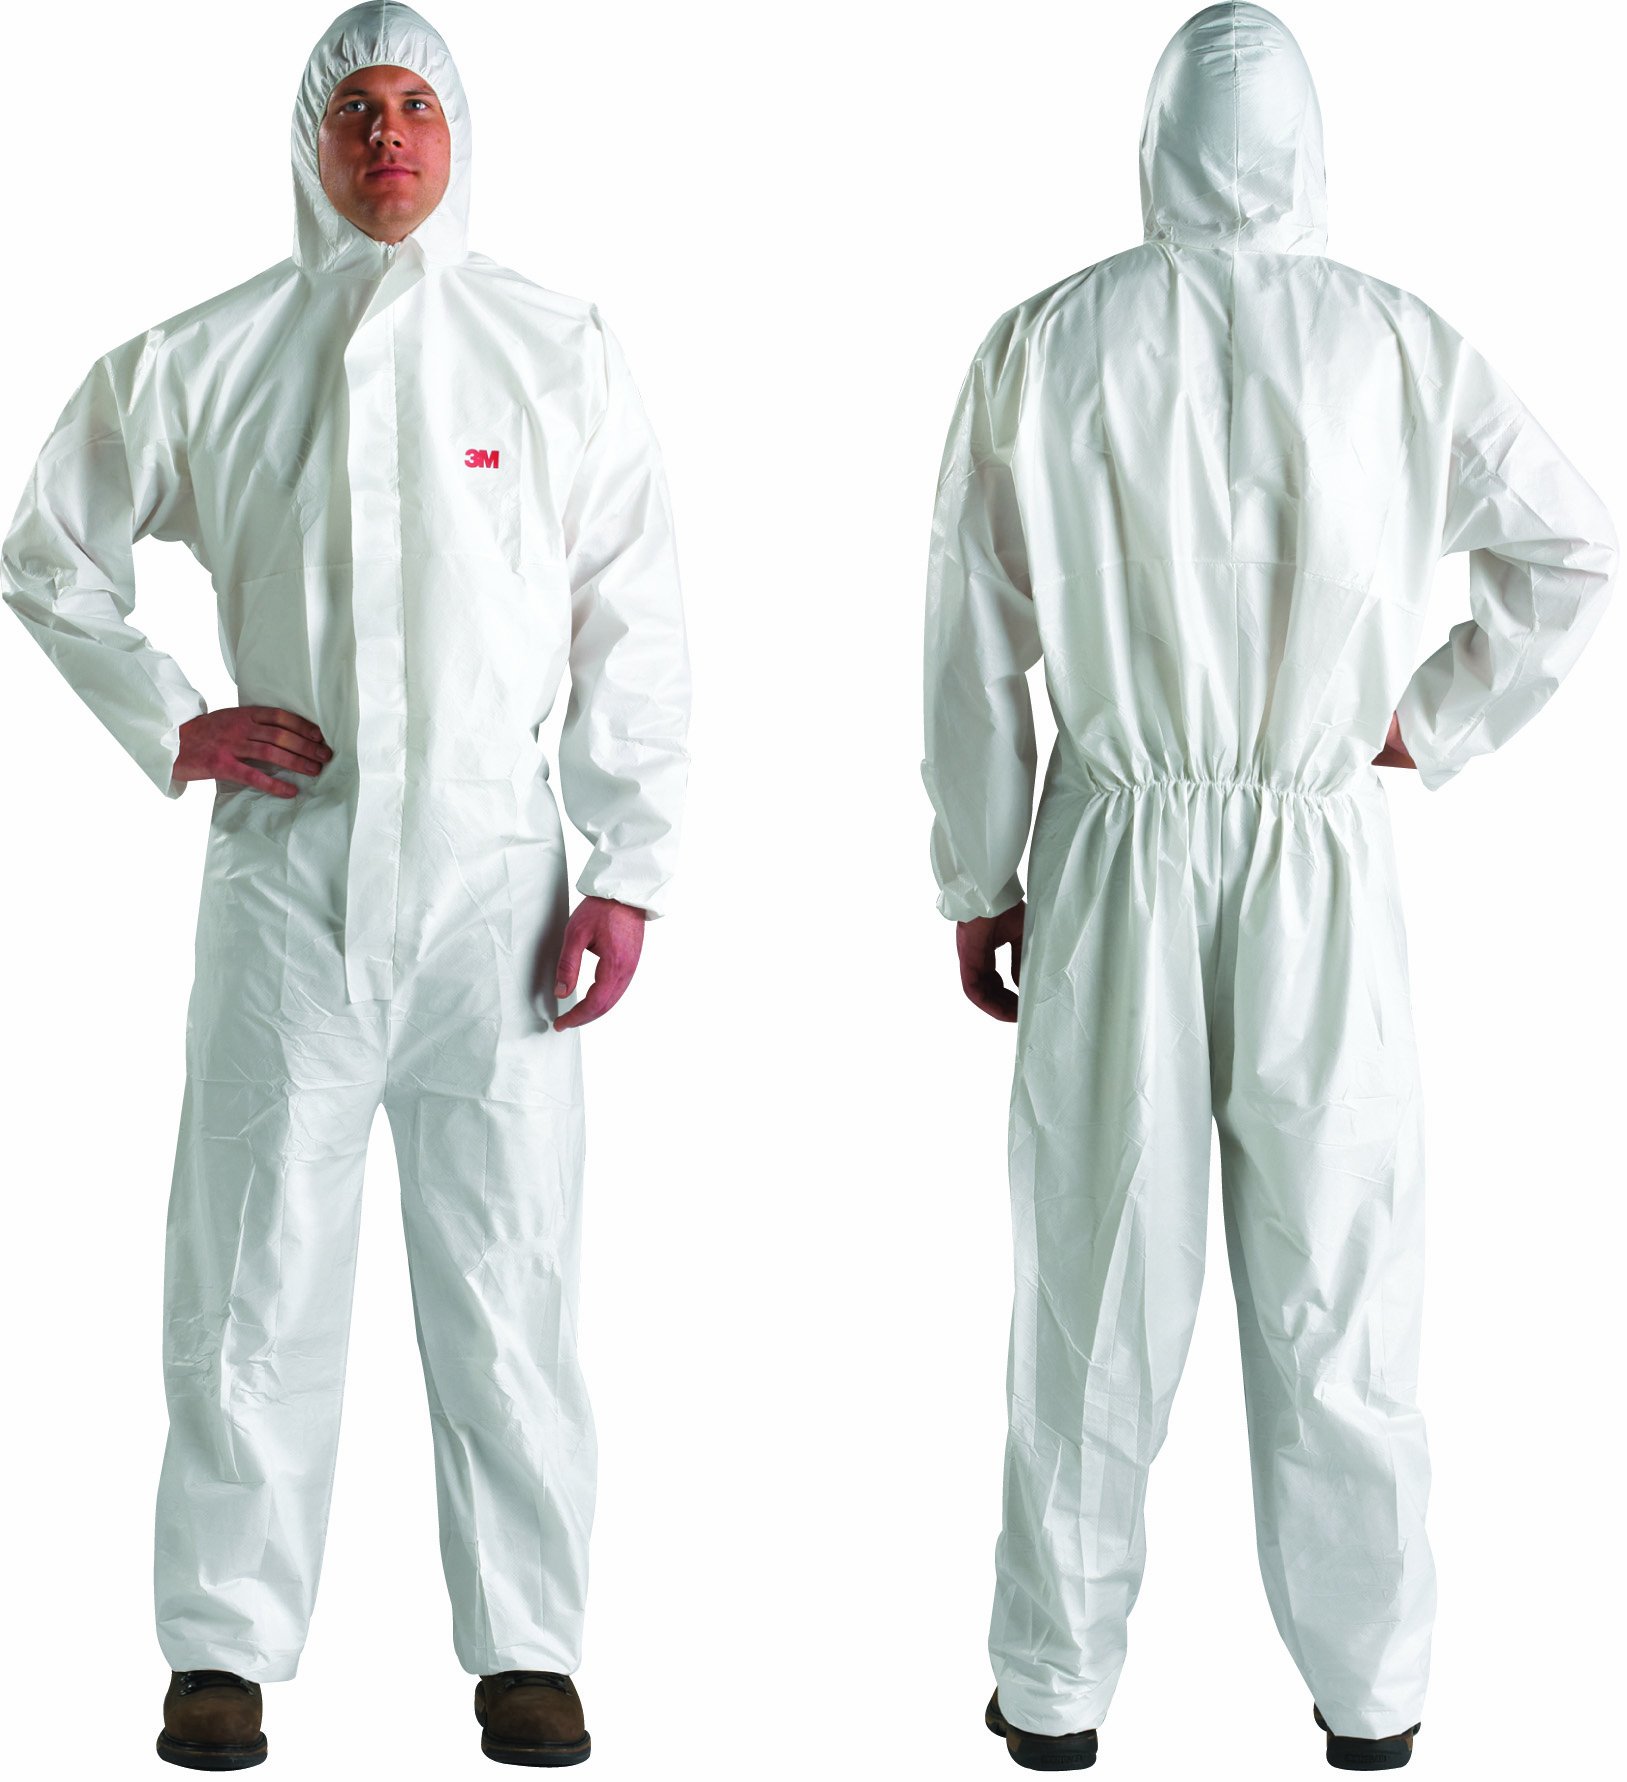 3M Protective Disposable Coveralls, Bulk Pack of 25 White Coveralls, Hooded with Elastic Cuff, Two-way Zipper, Antistatic Protection, XXL, 4510-BLK-XXL